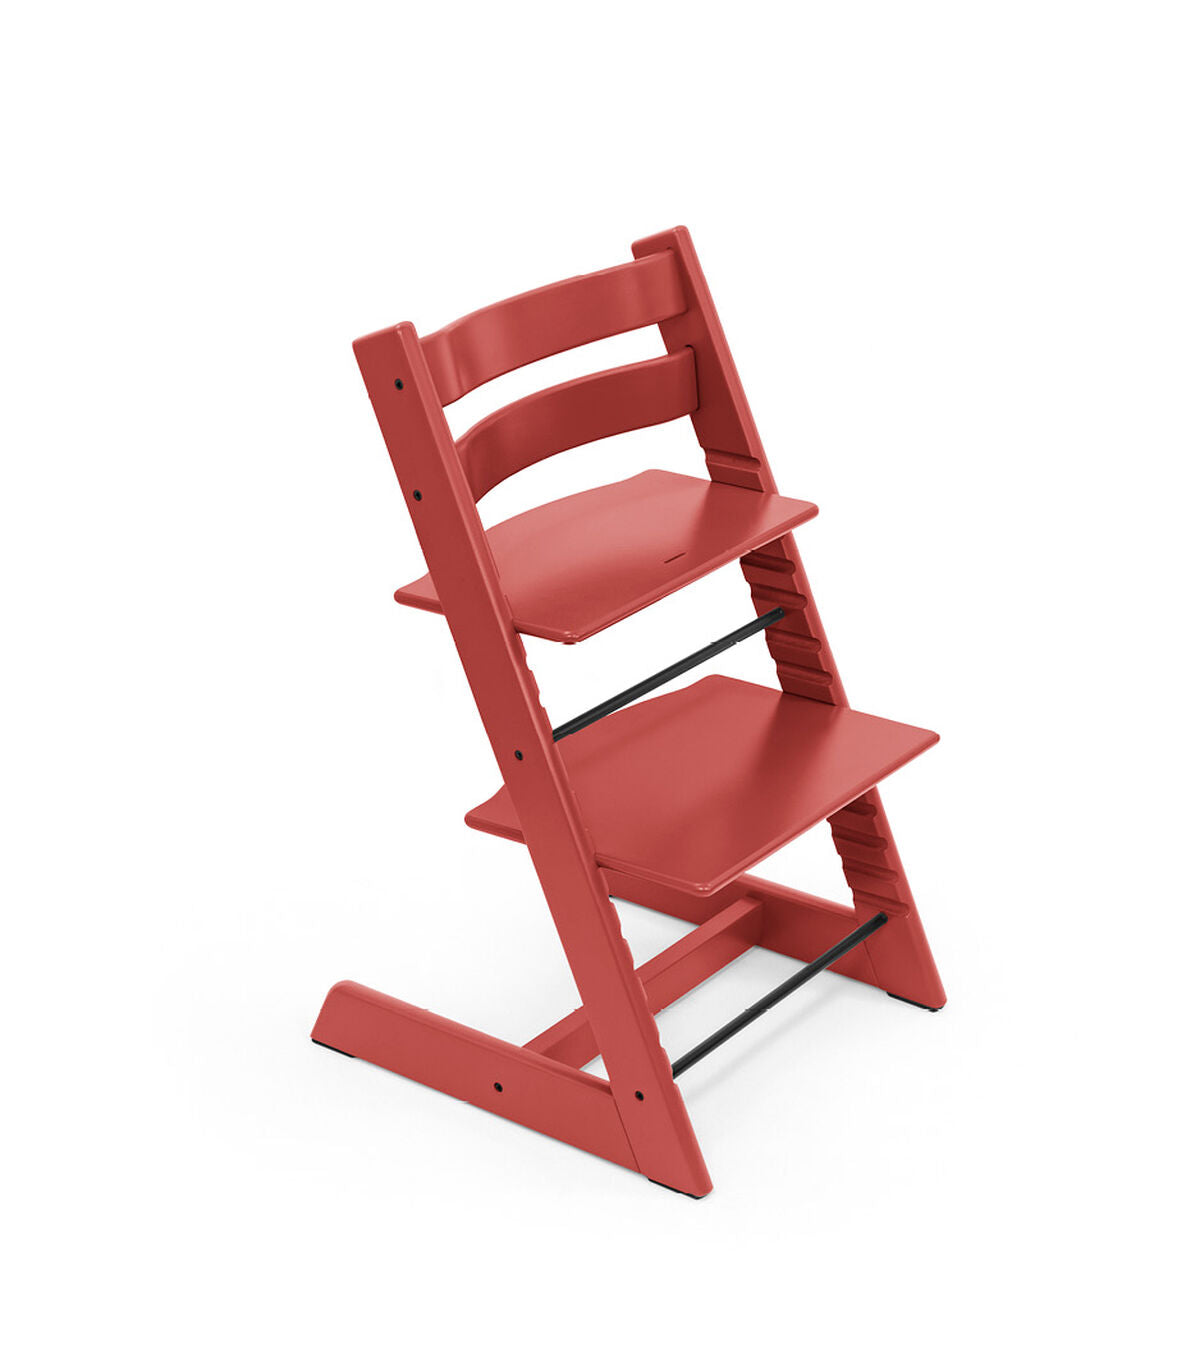 Stokke Tripp Trapp Chair Is Now Available In Warm Red & Soft Mint